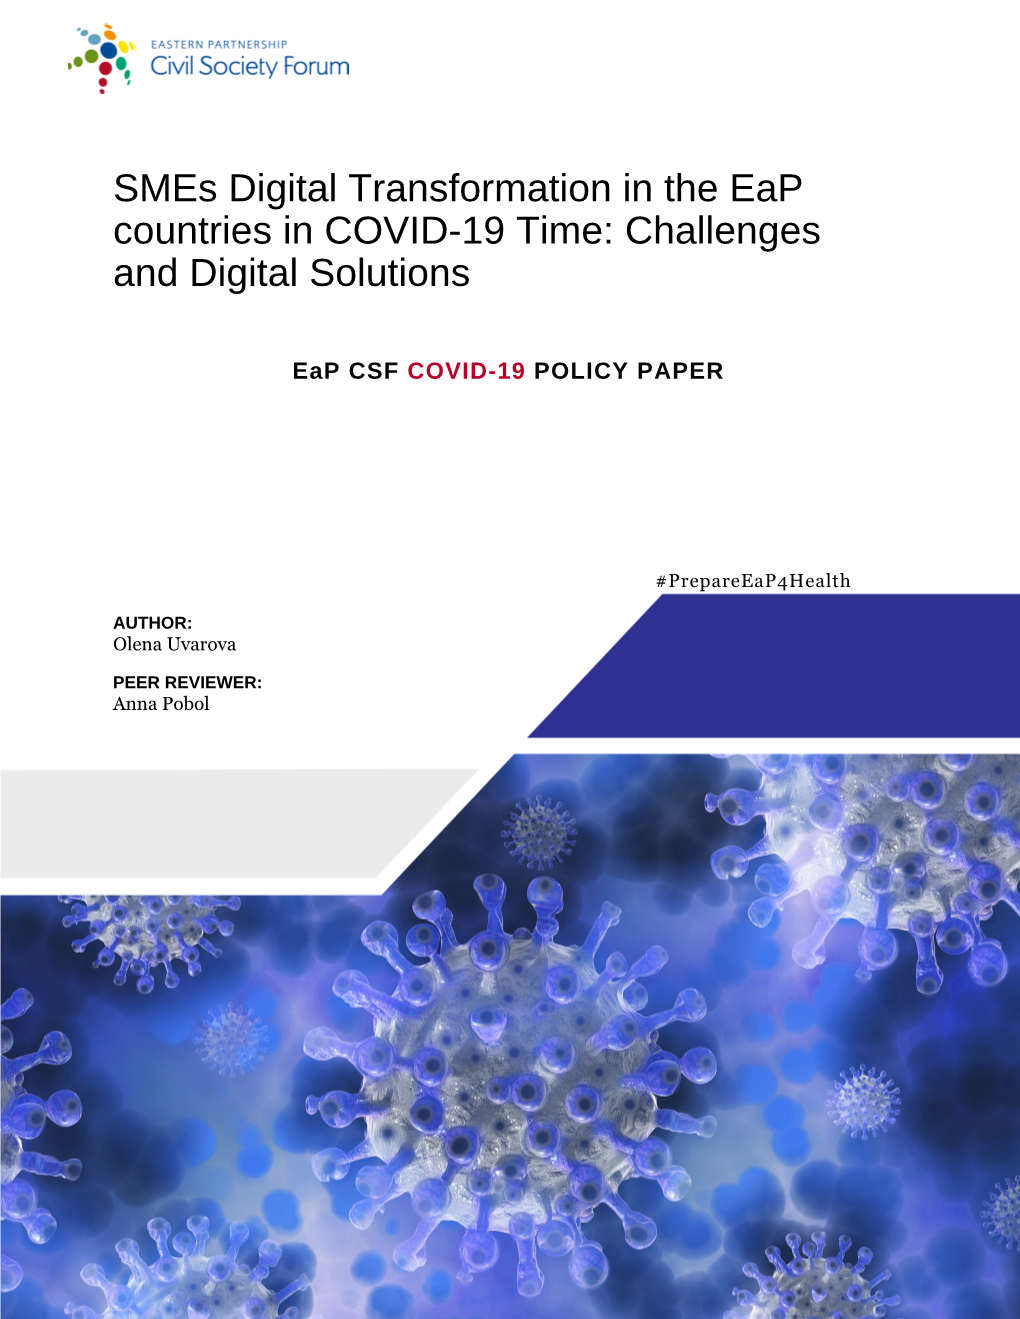 Smes Digital Transformation in the Eap Countries in COVID-19 Time: Challenges and Digital Solutions